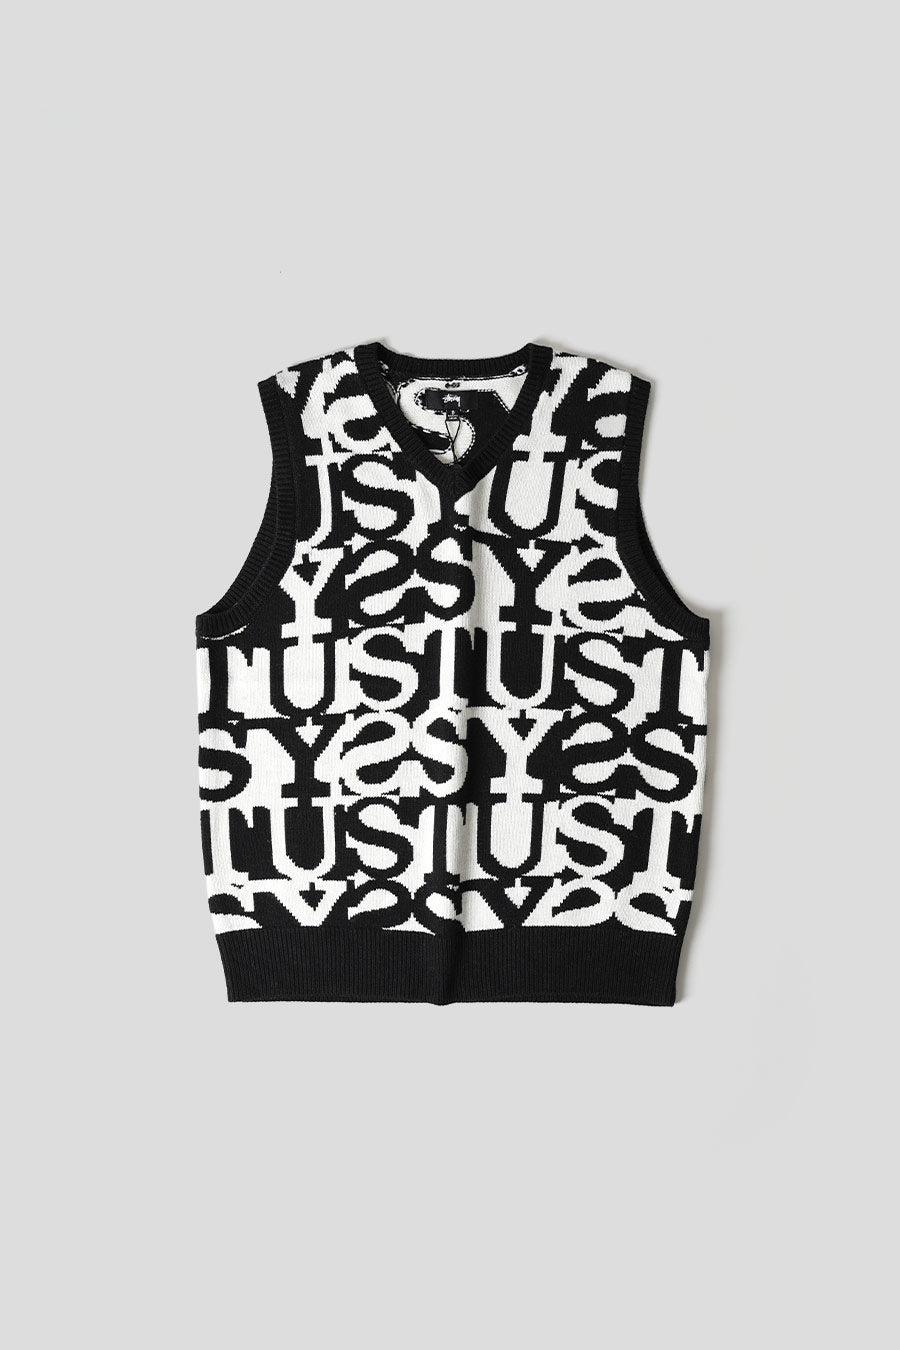 Stussy - PULL SANS MANCHES STACKED SWEATER NOIR ET BLANC - LE LABO STORE